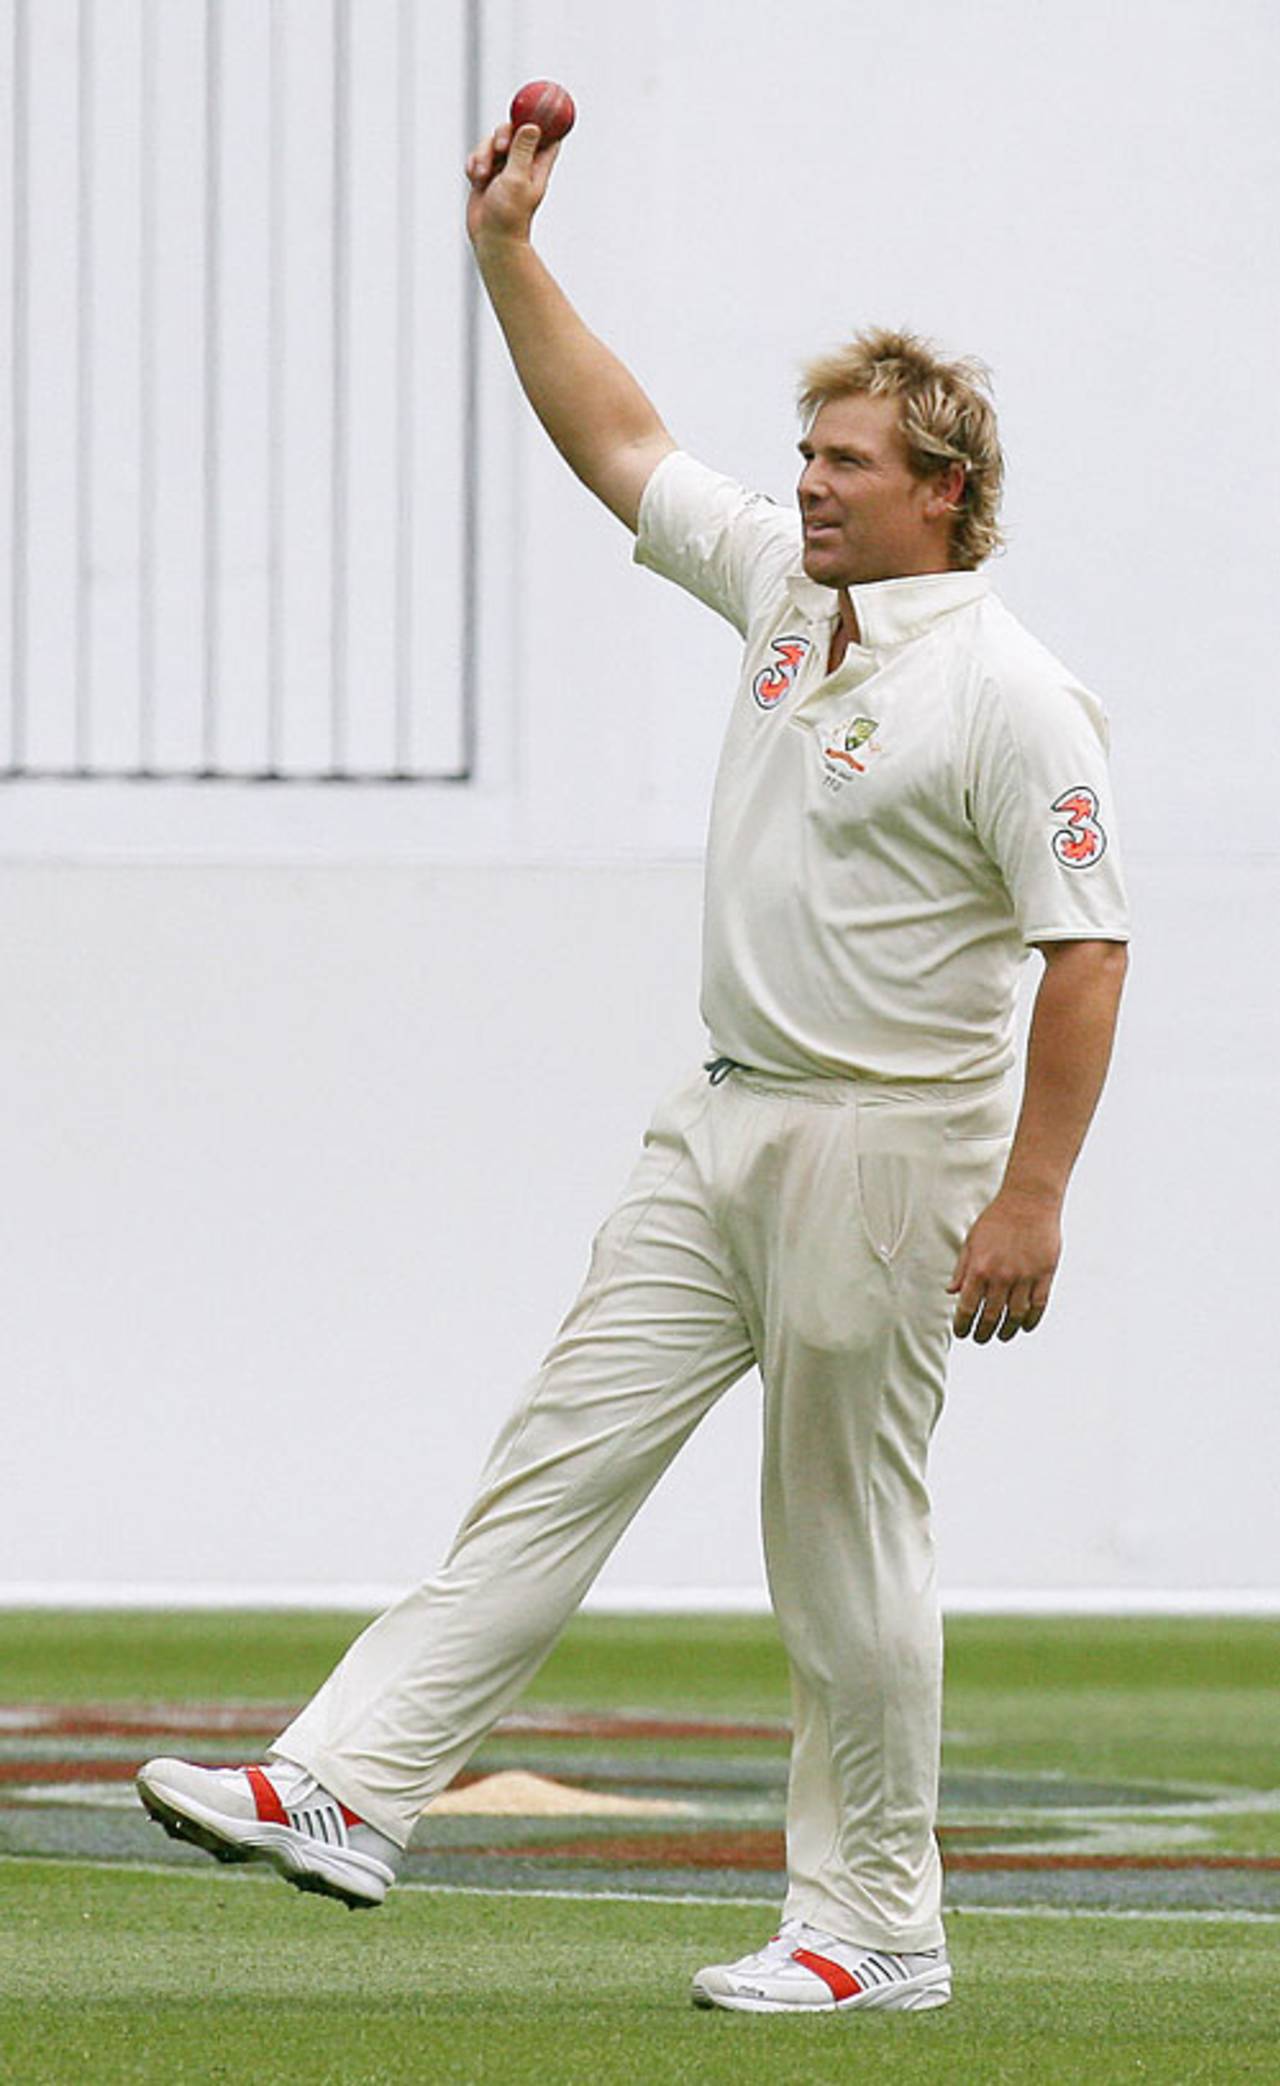 Shane Warne acknowledges the crowd after picking up his 700th Test wicket, Australia v England, 4th Test, Melbourne, December 26, 2006